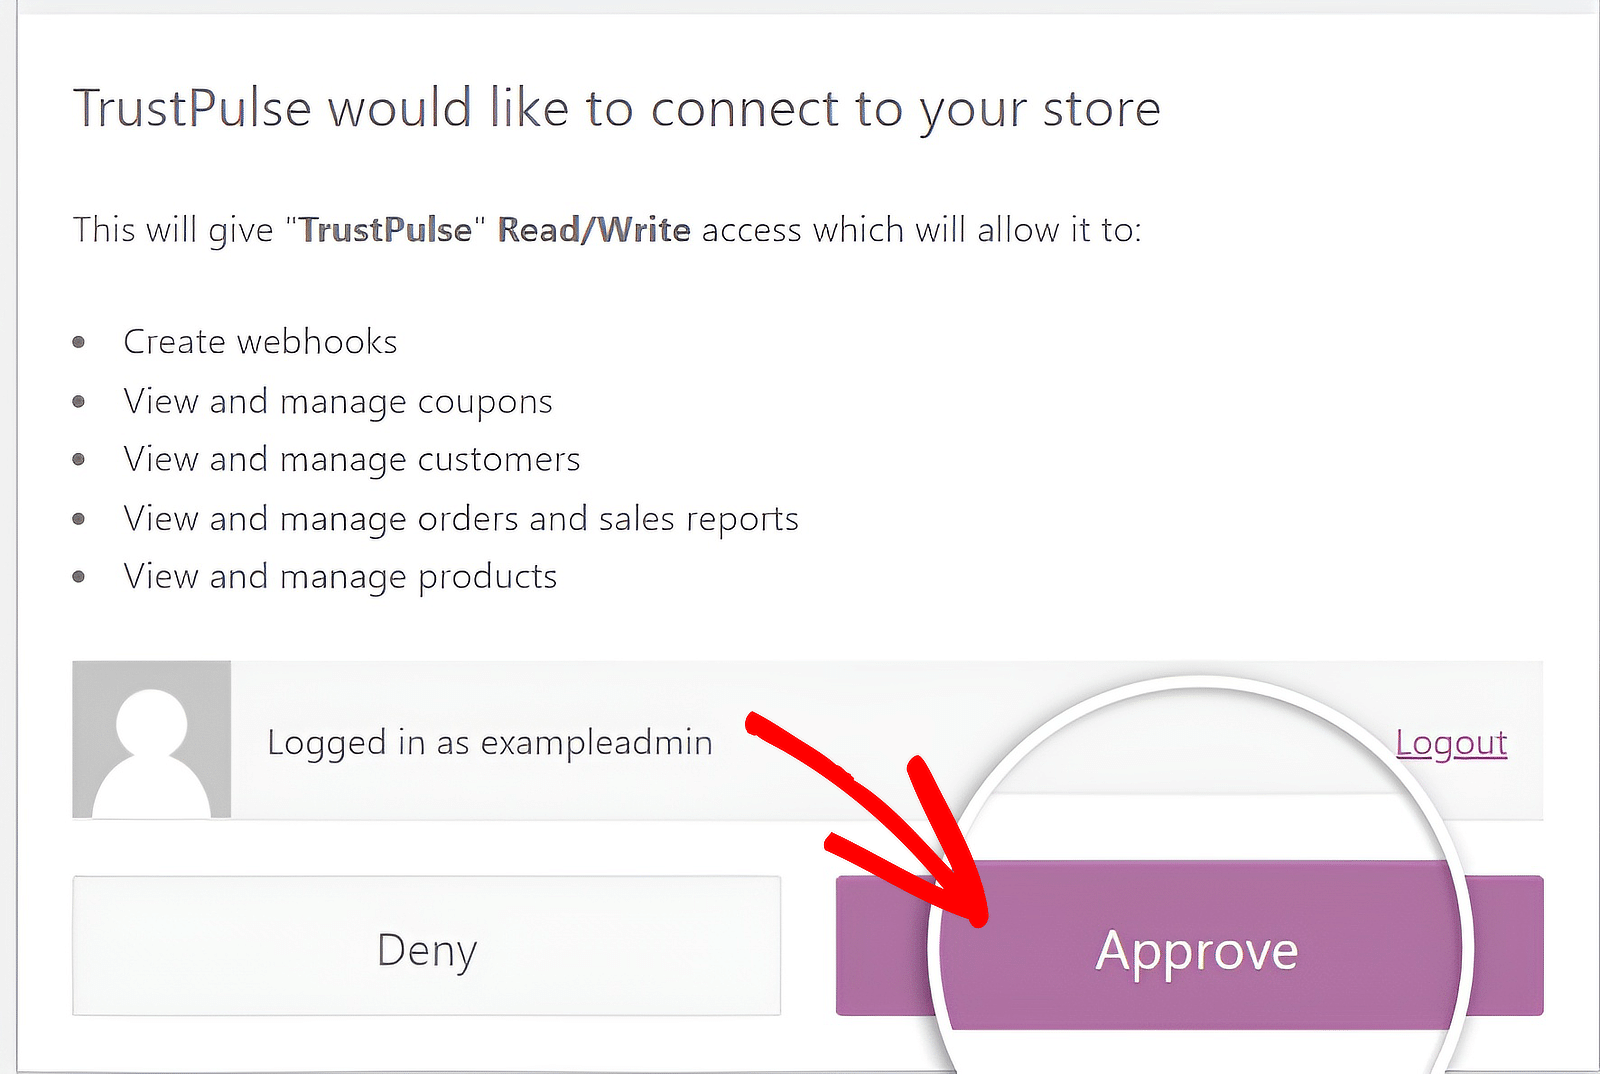 TrustPulse WooCommerce request approval